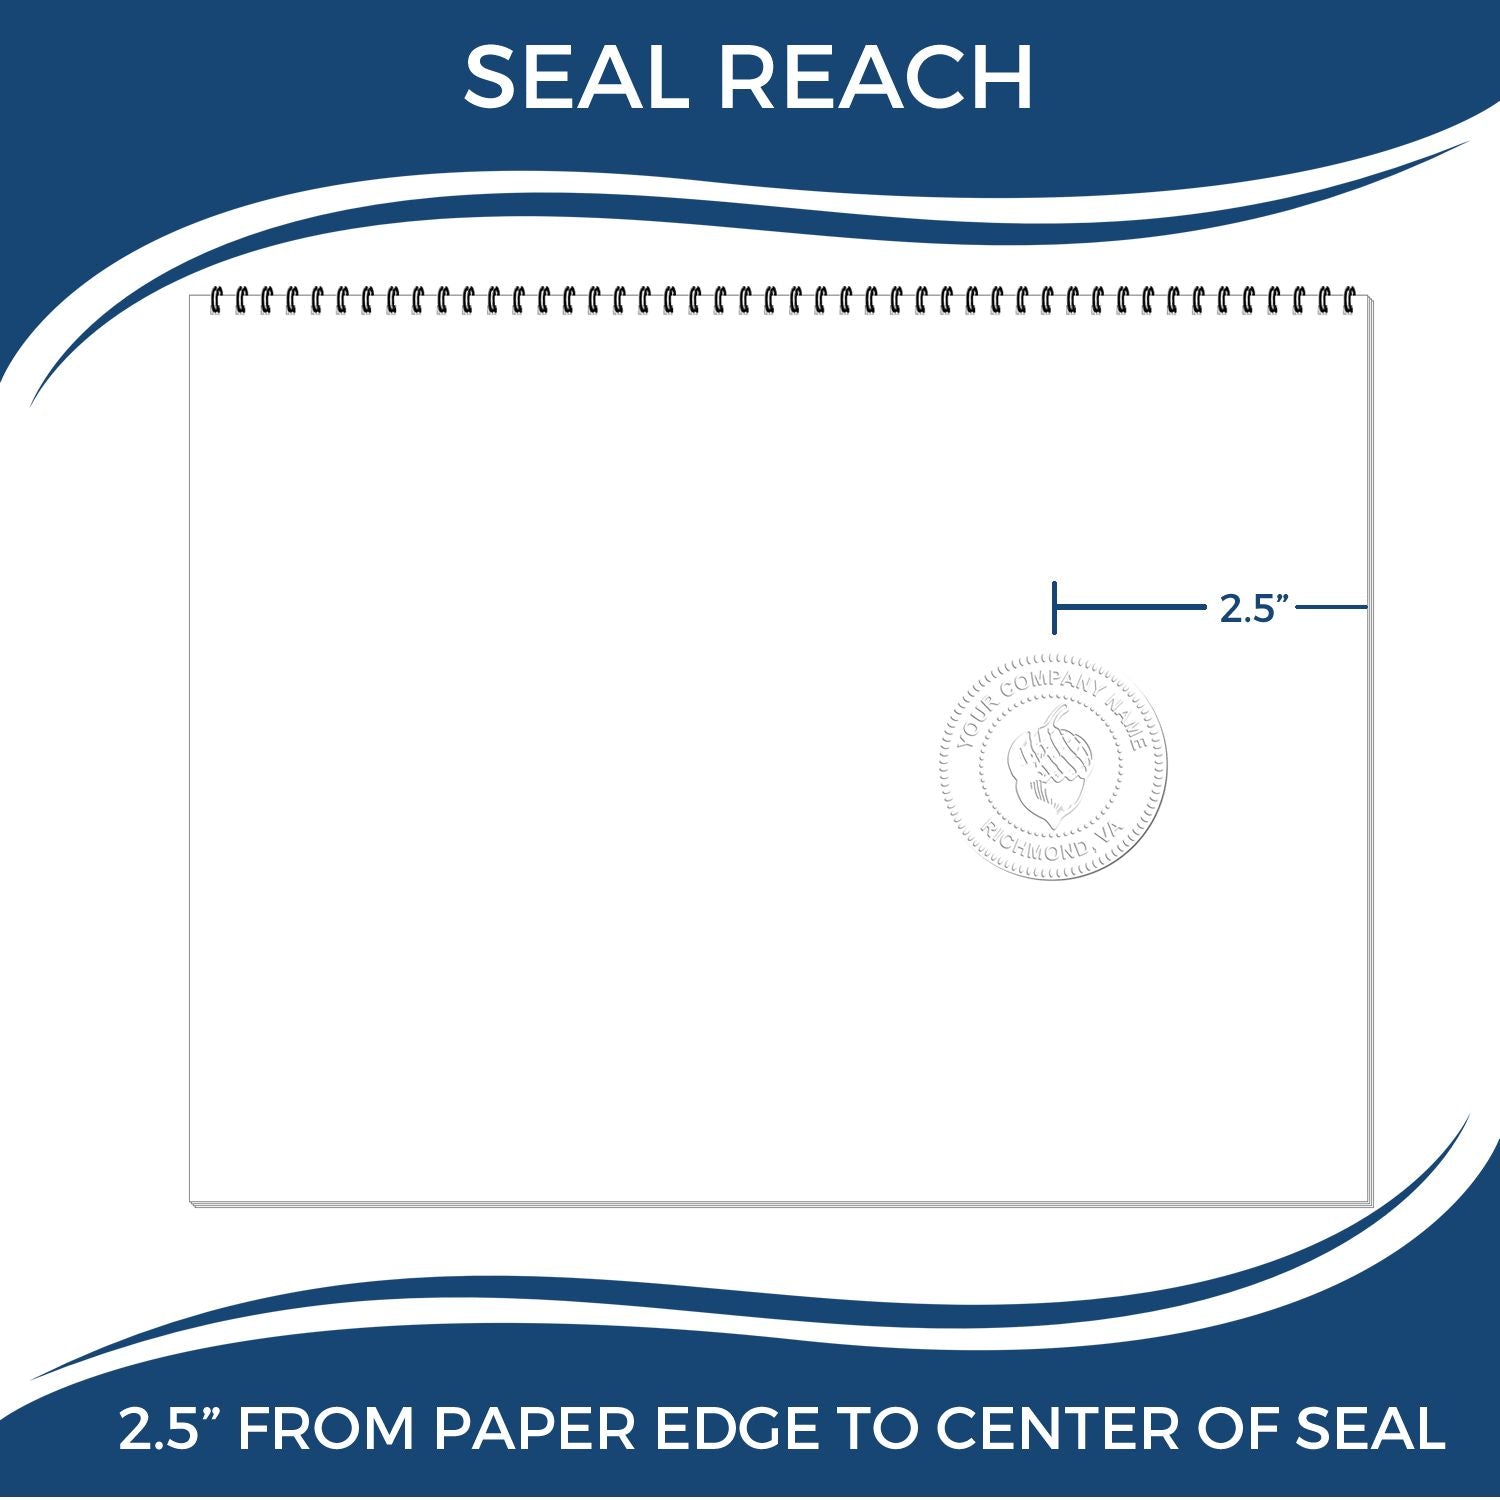 An infographic showing the seal reach which is represented by a ruler and a miniature seal image of the Heavy Duty Cast Iron Tennessee Engineer Seal Embosser